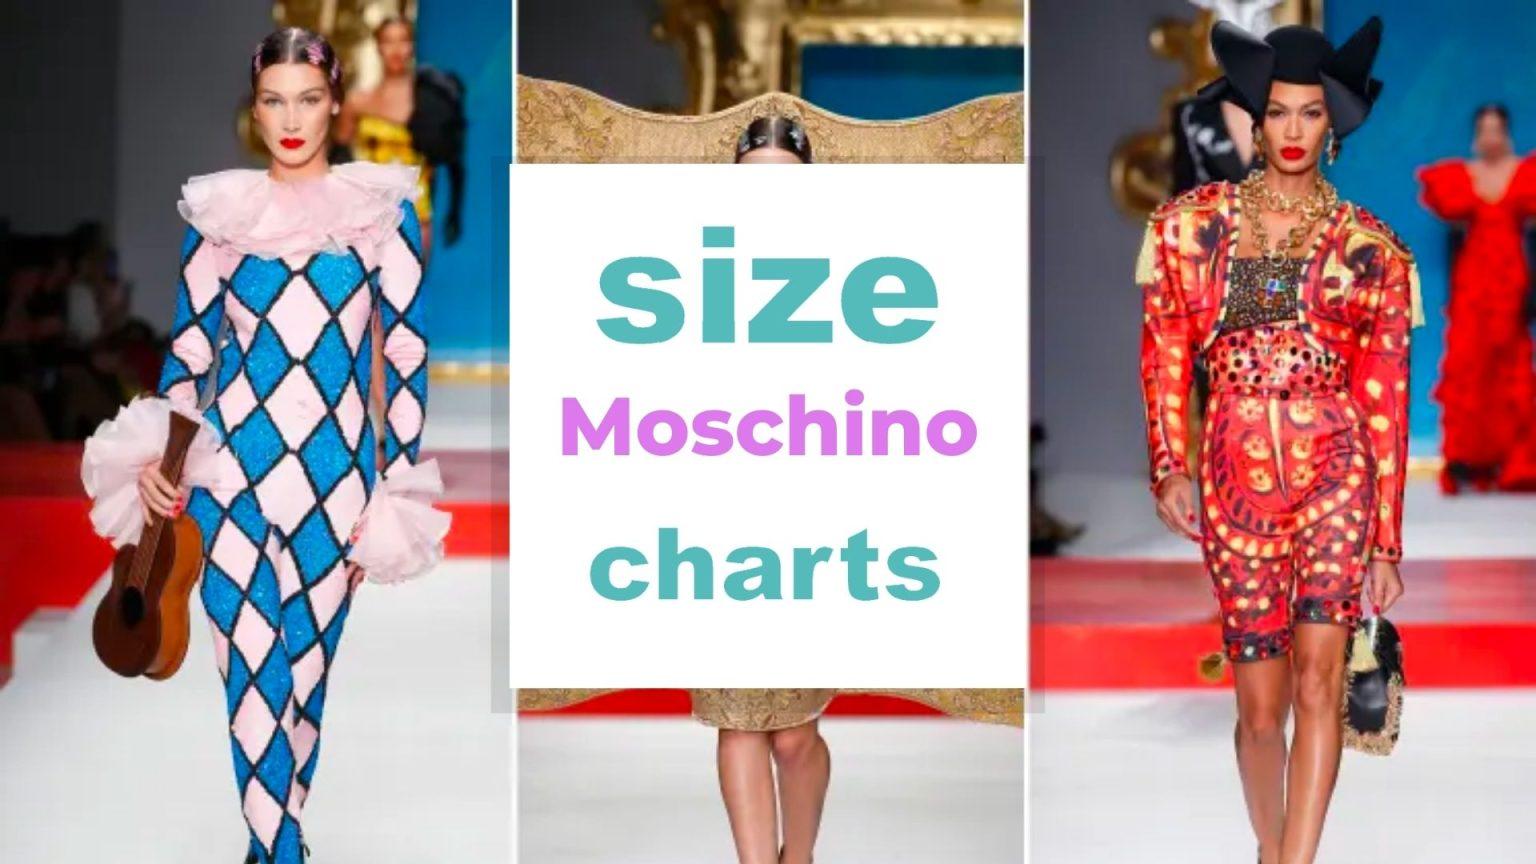 What Size am I in Moschino? (Size Charts Included)